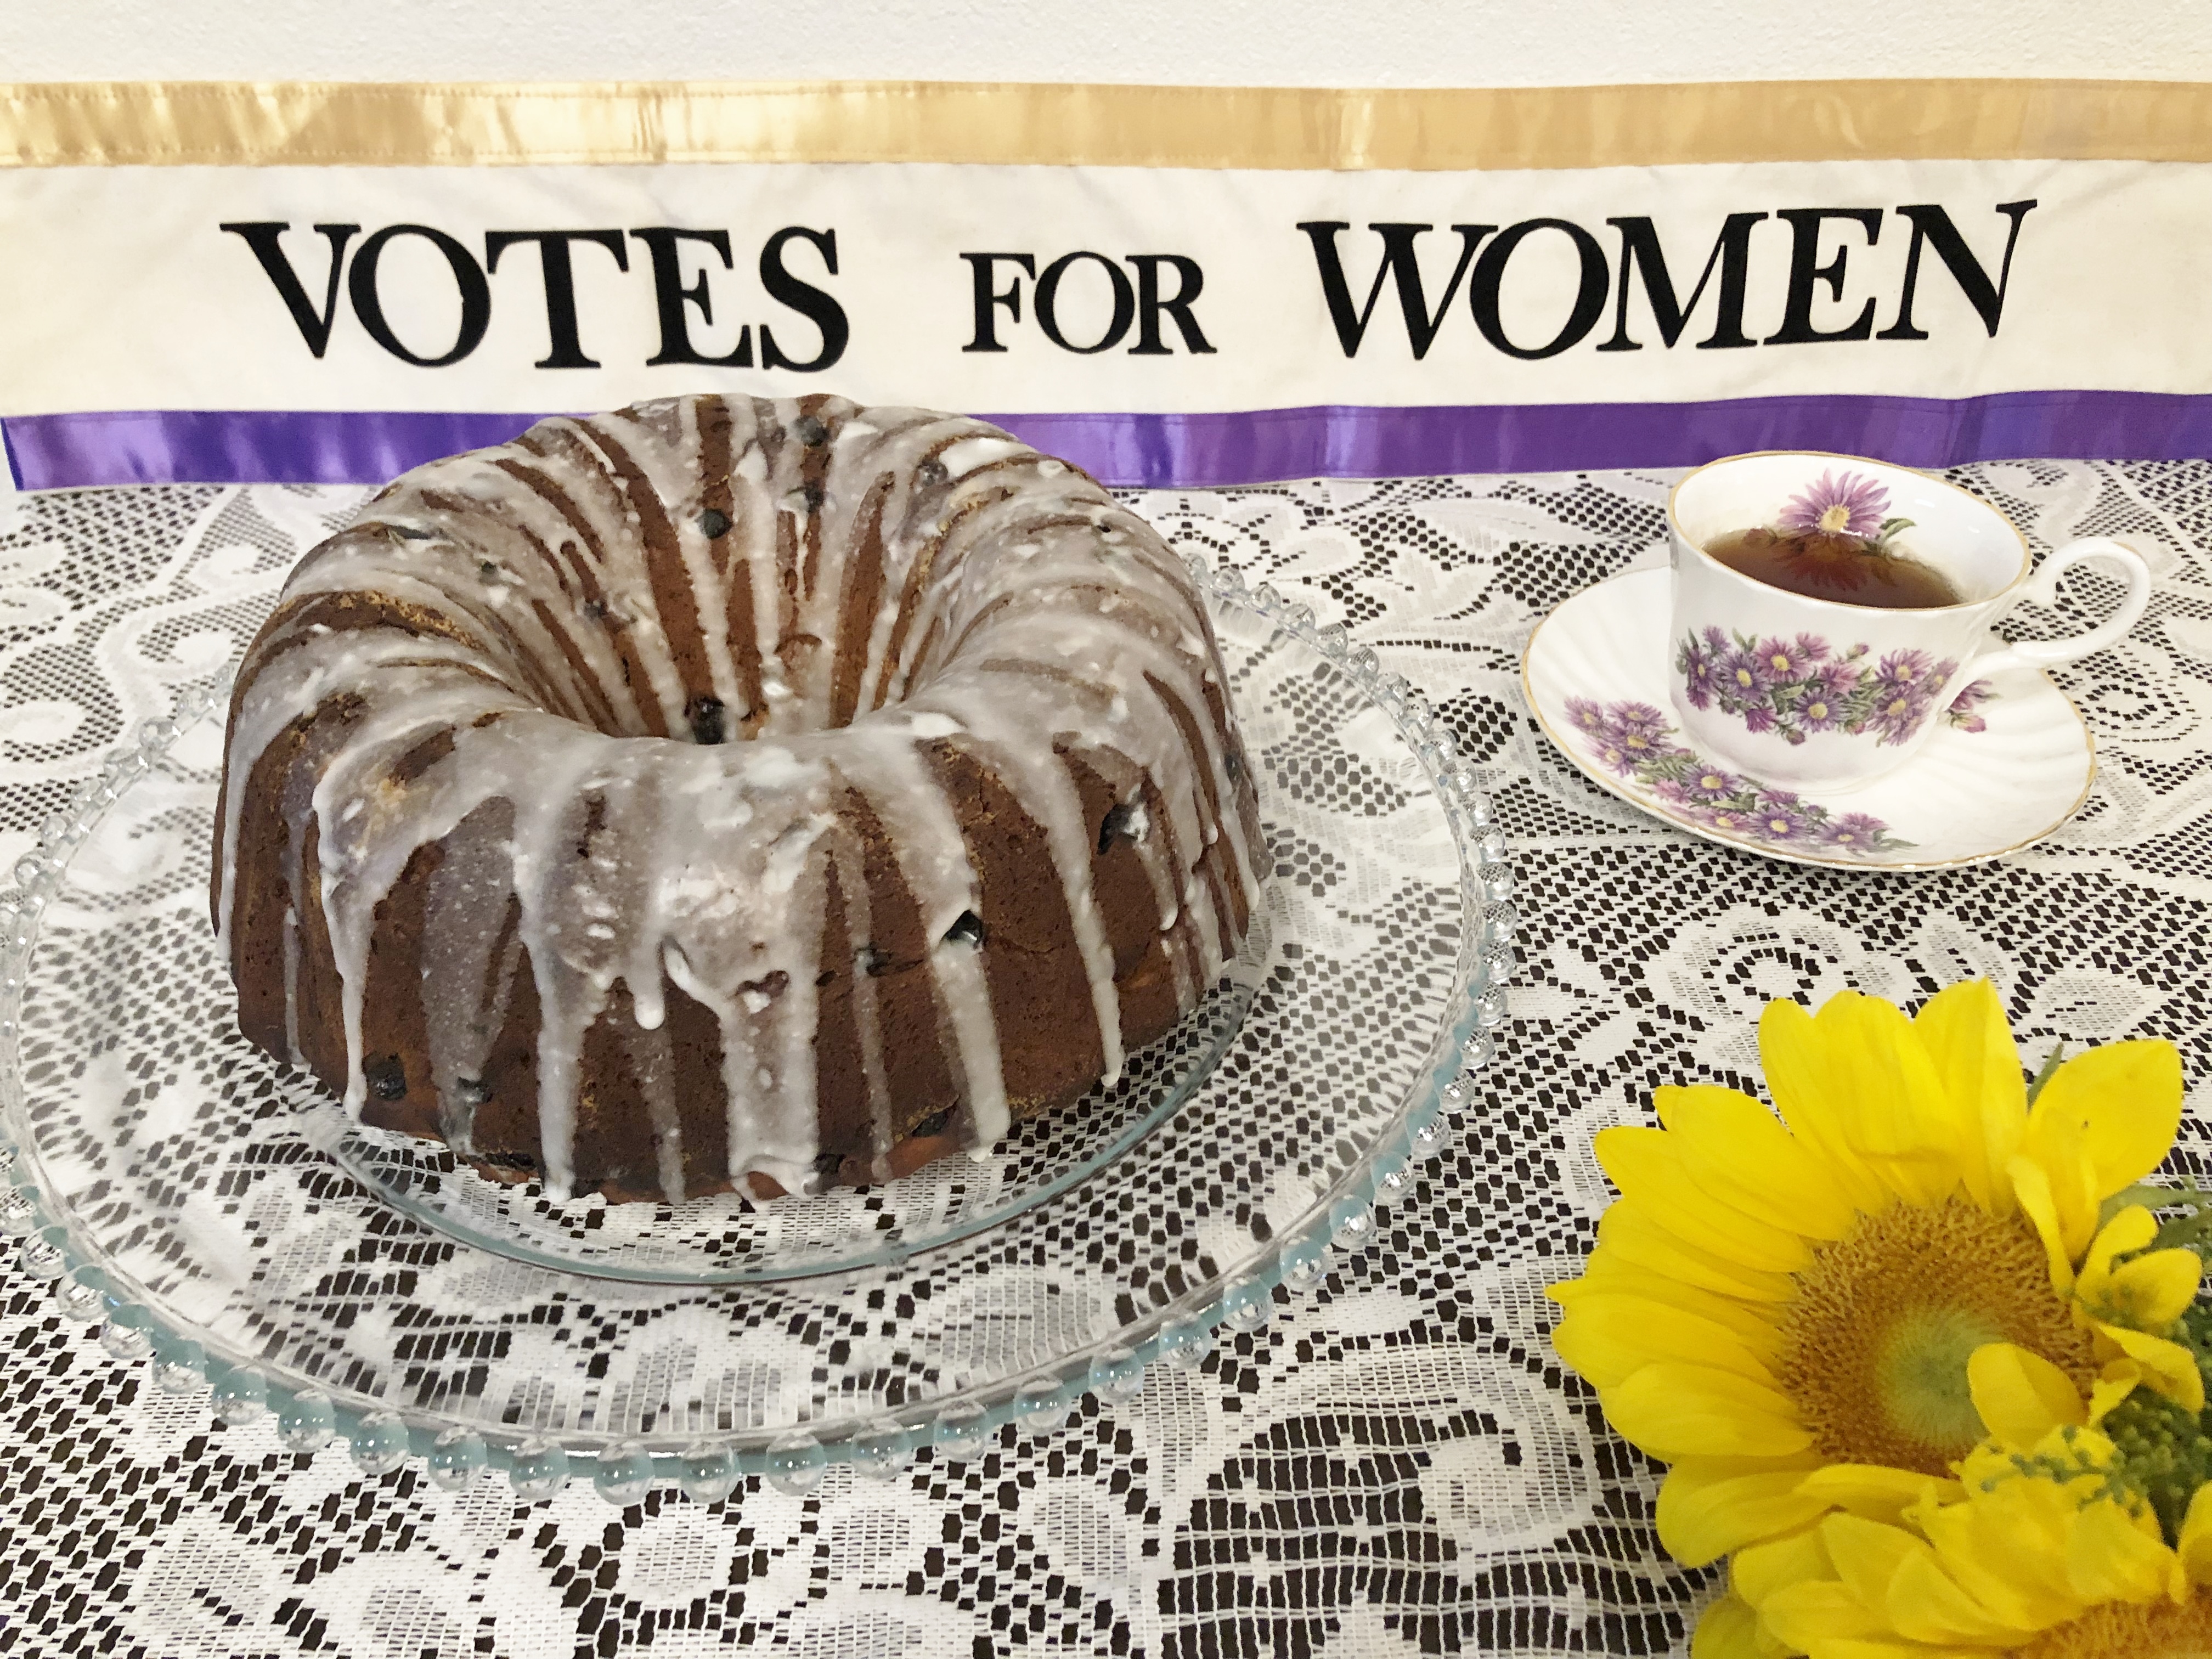 A bundt cake with white glaze on a glass stand, a cup of tea on a saucer, and a sunflower, under a "votes for women" banner.